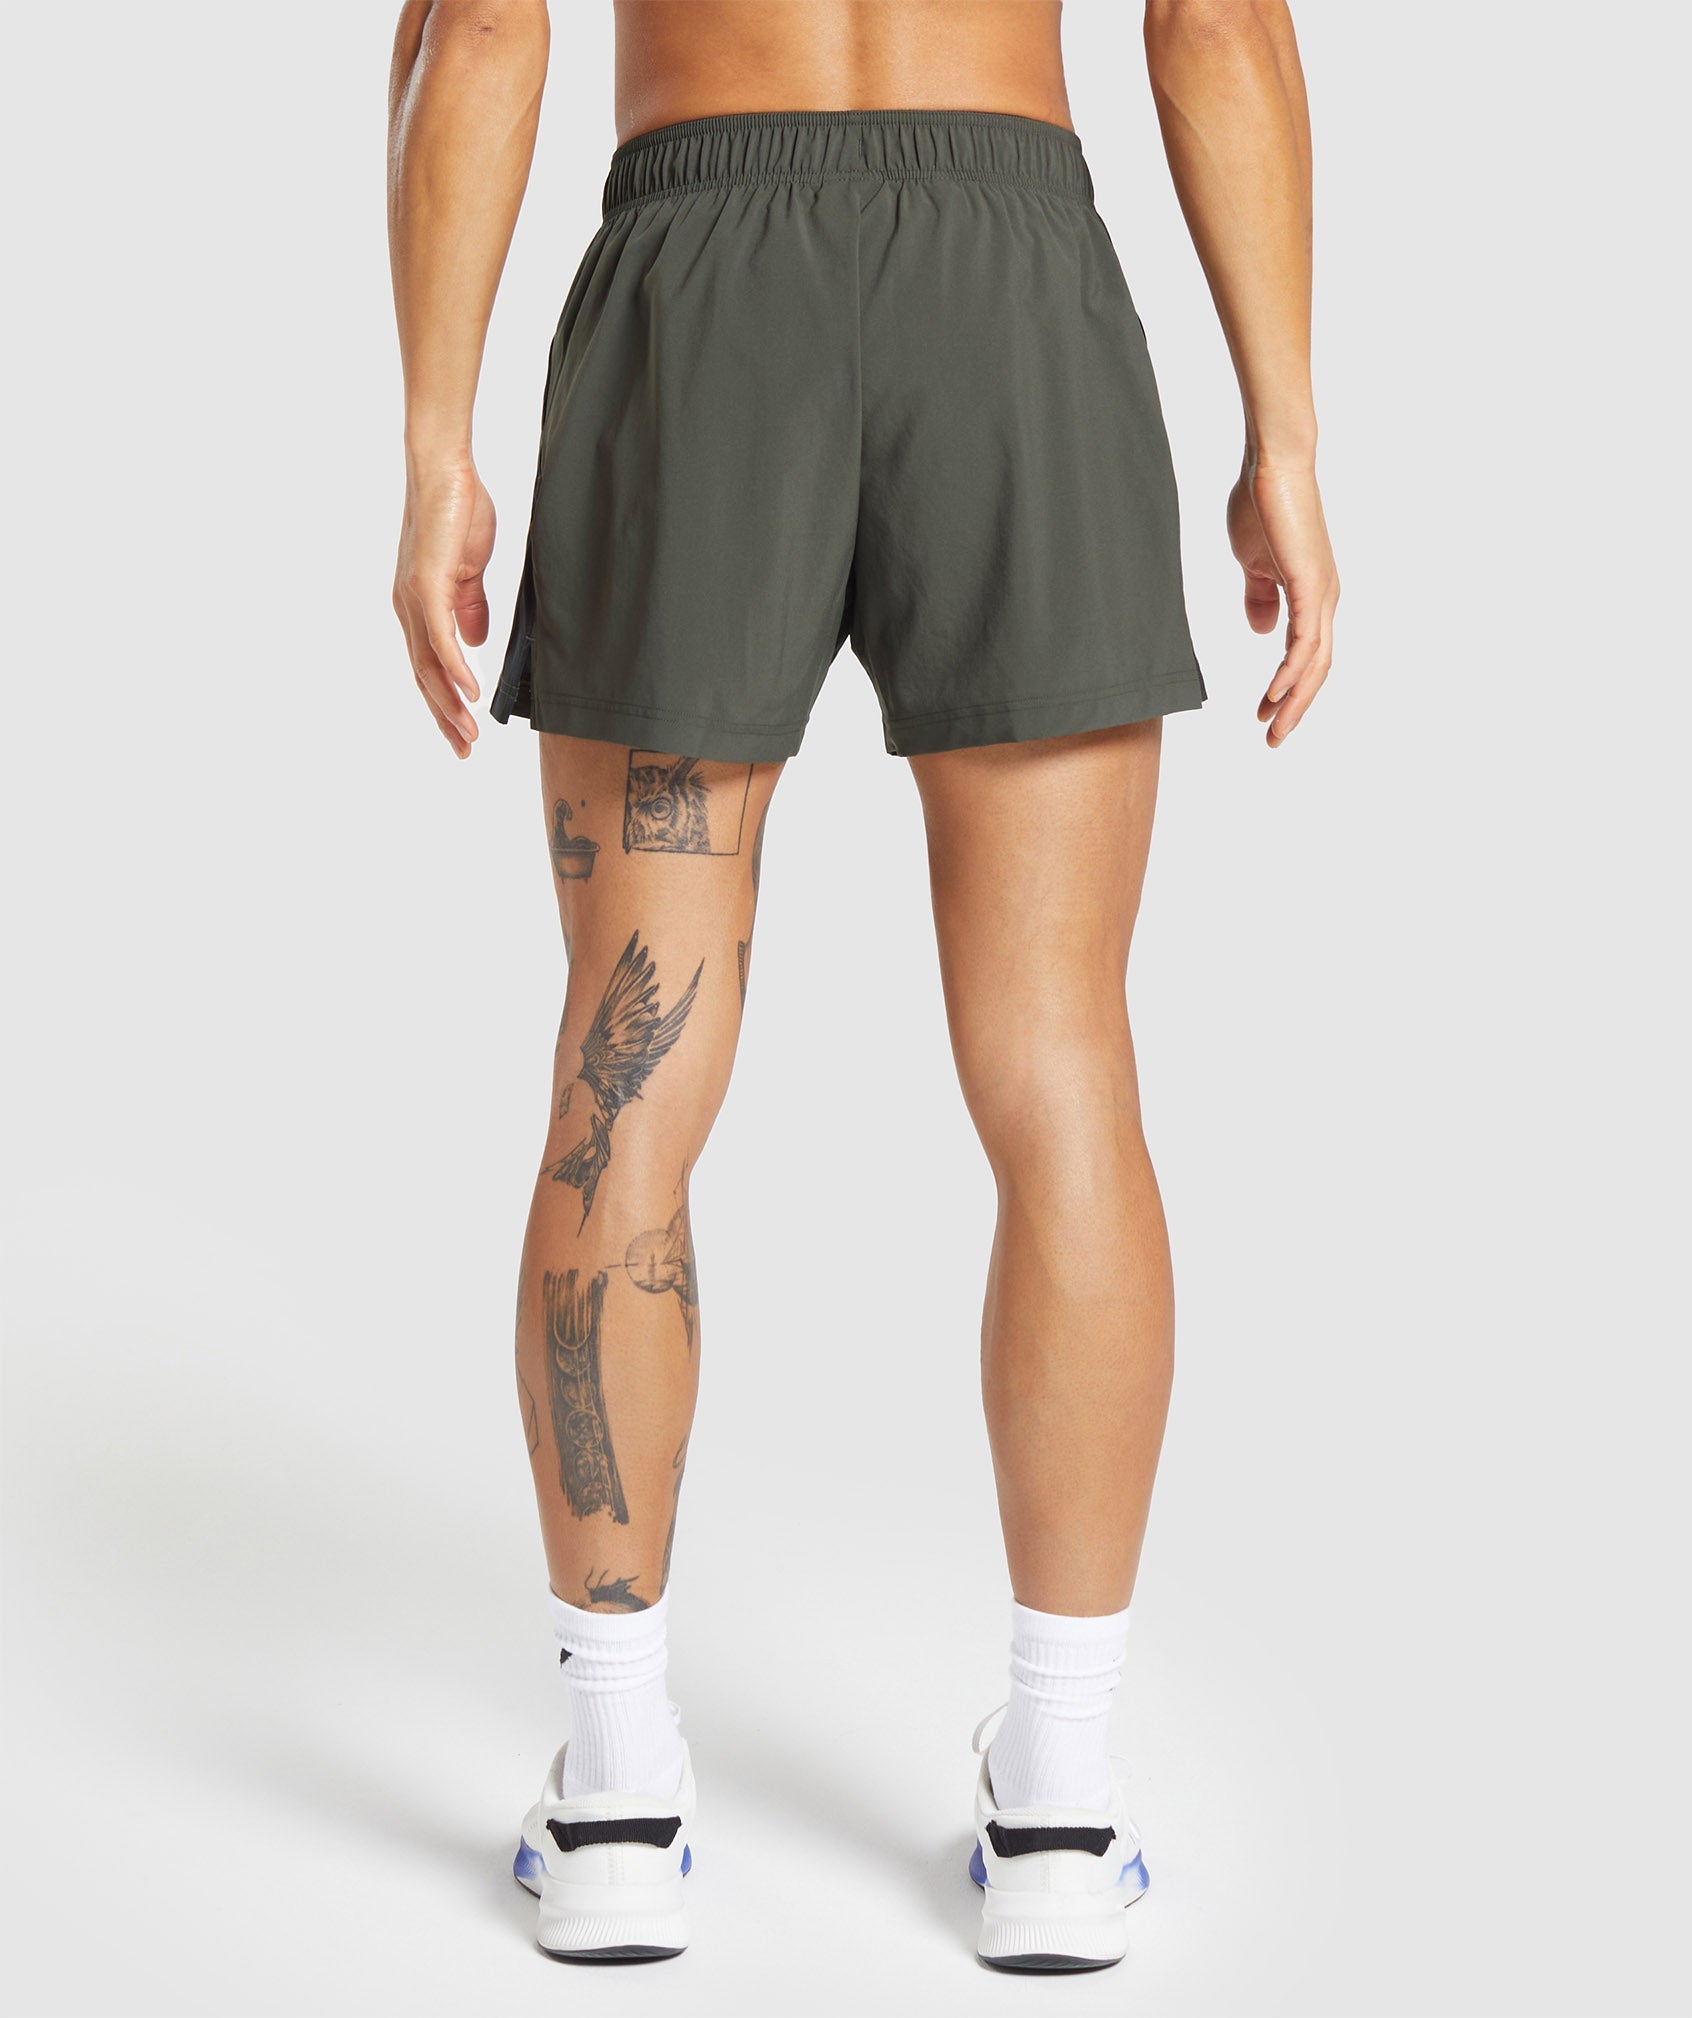 Sport 5" Shorts in Strength Green/Black - view 2